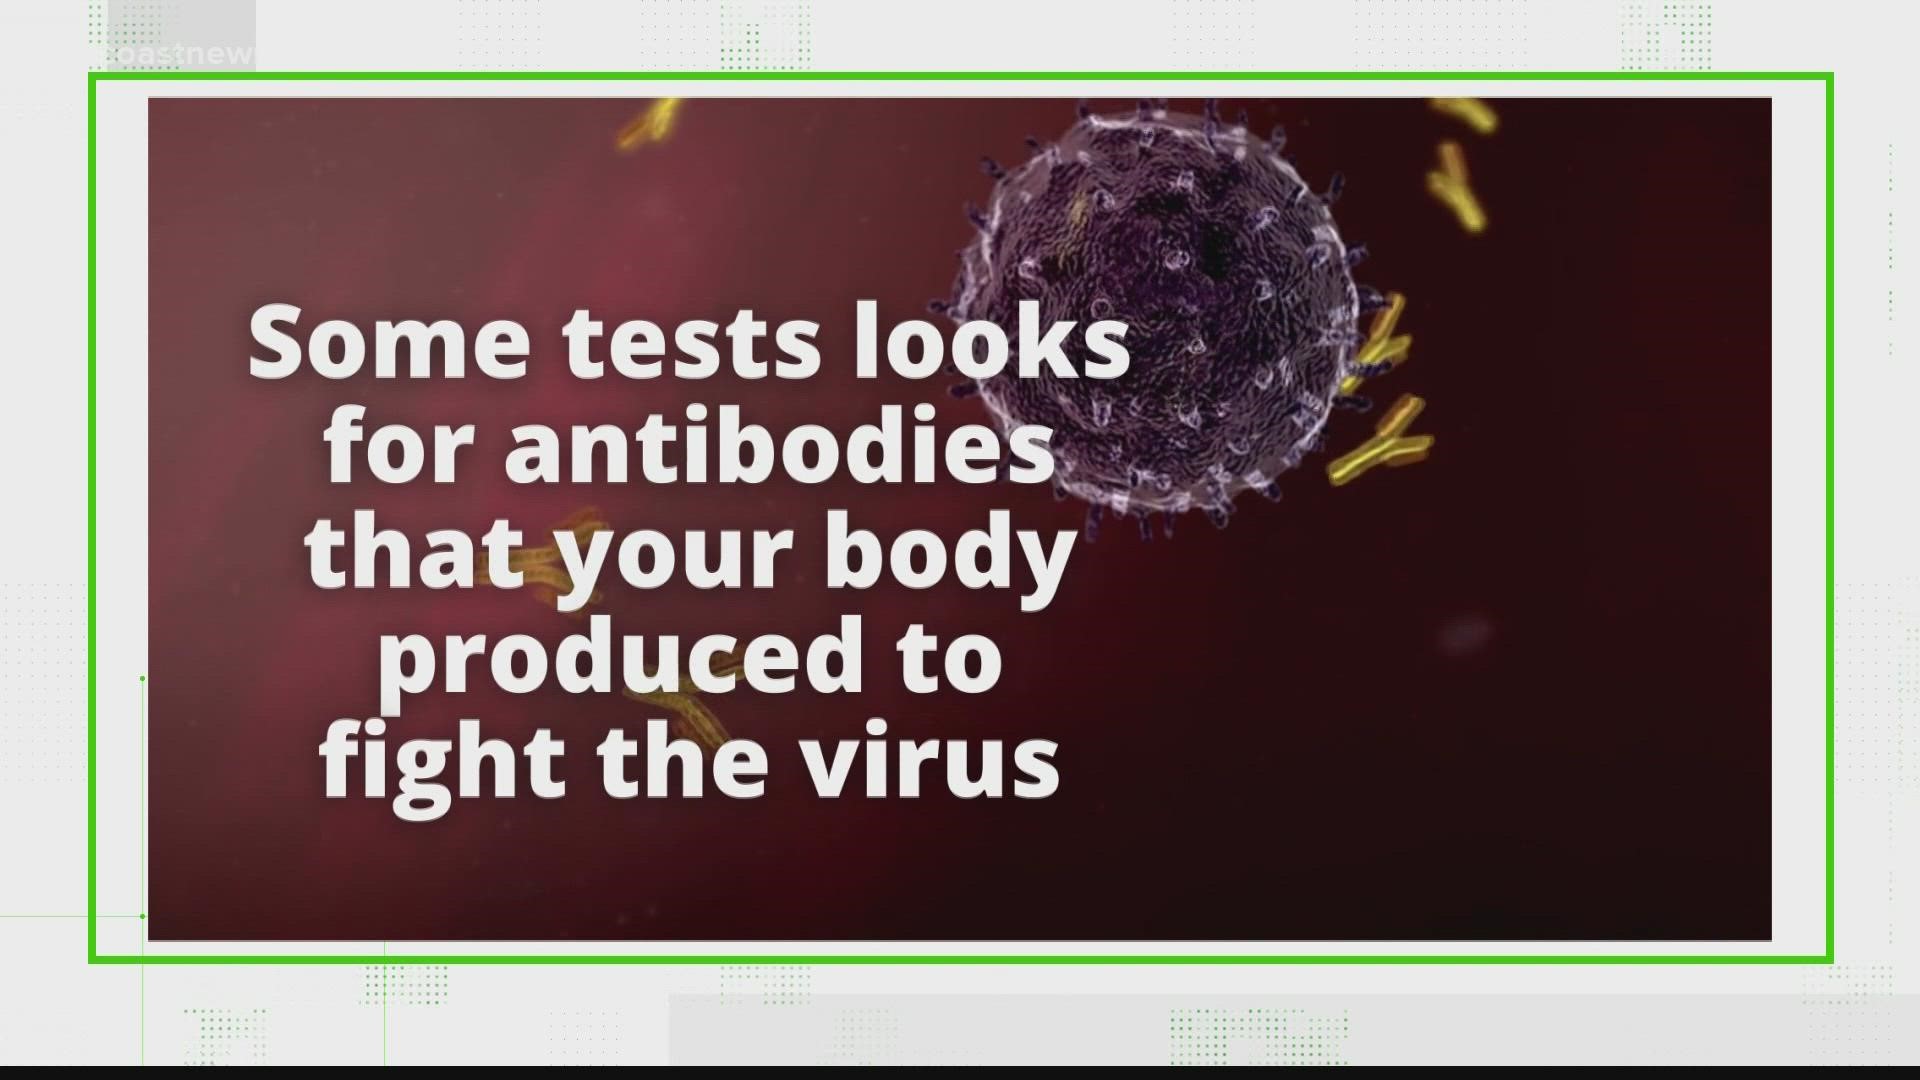 However, the vaccine can make you test positive on 
the COVID-19 antibody test.